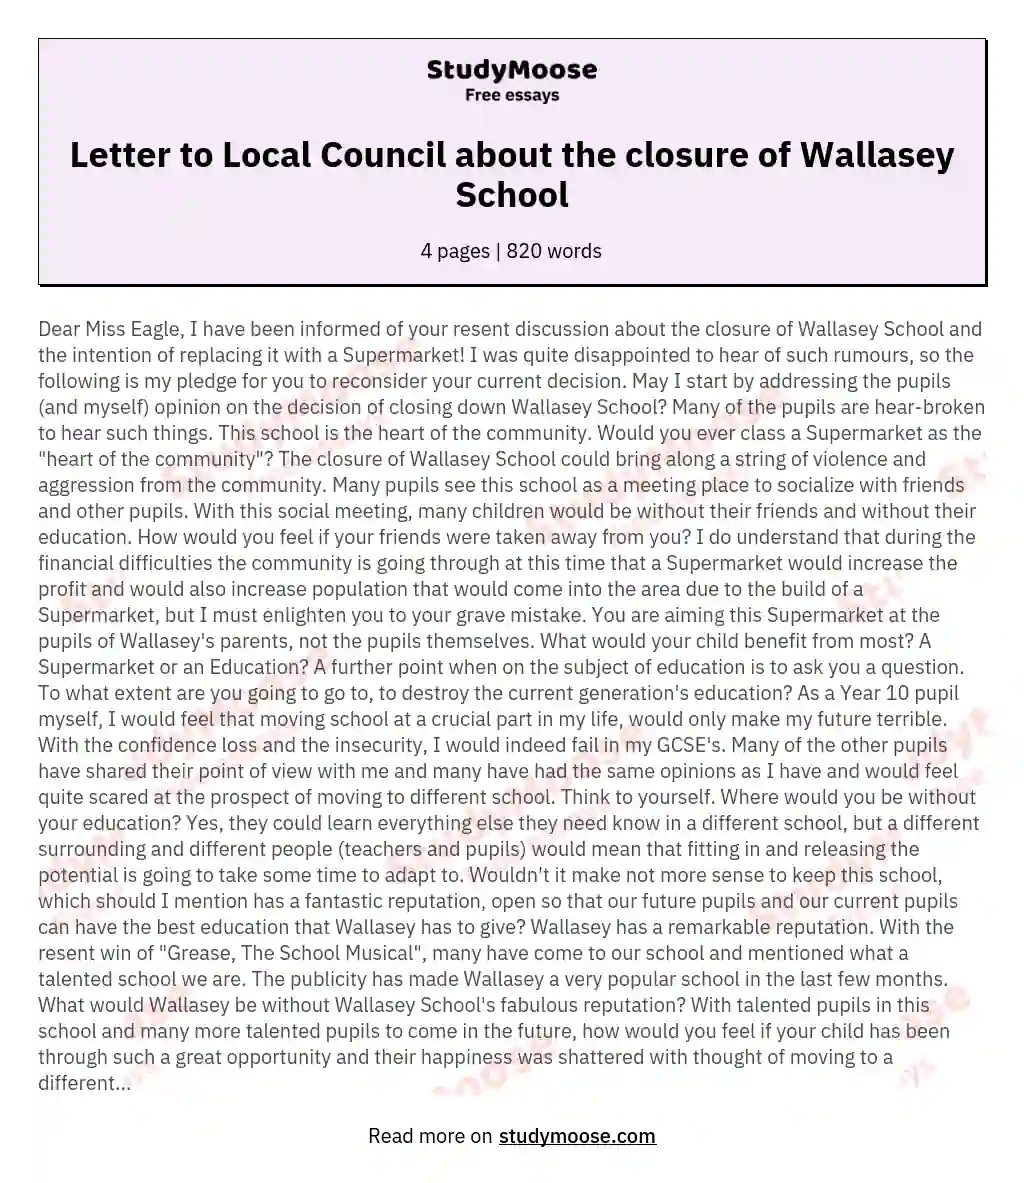 Letter to Local Council about the closure of Wallasey School essay